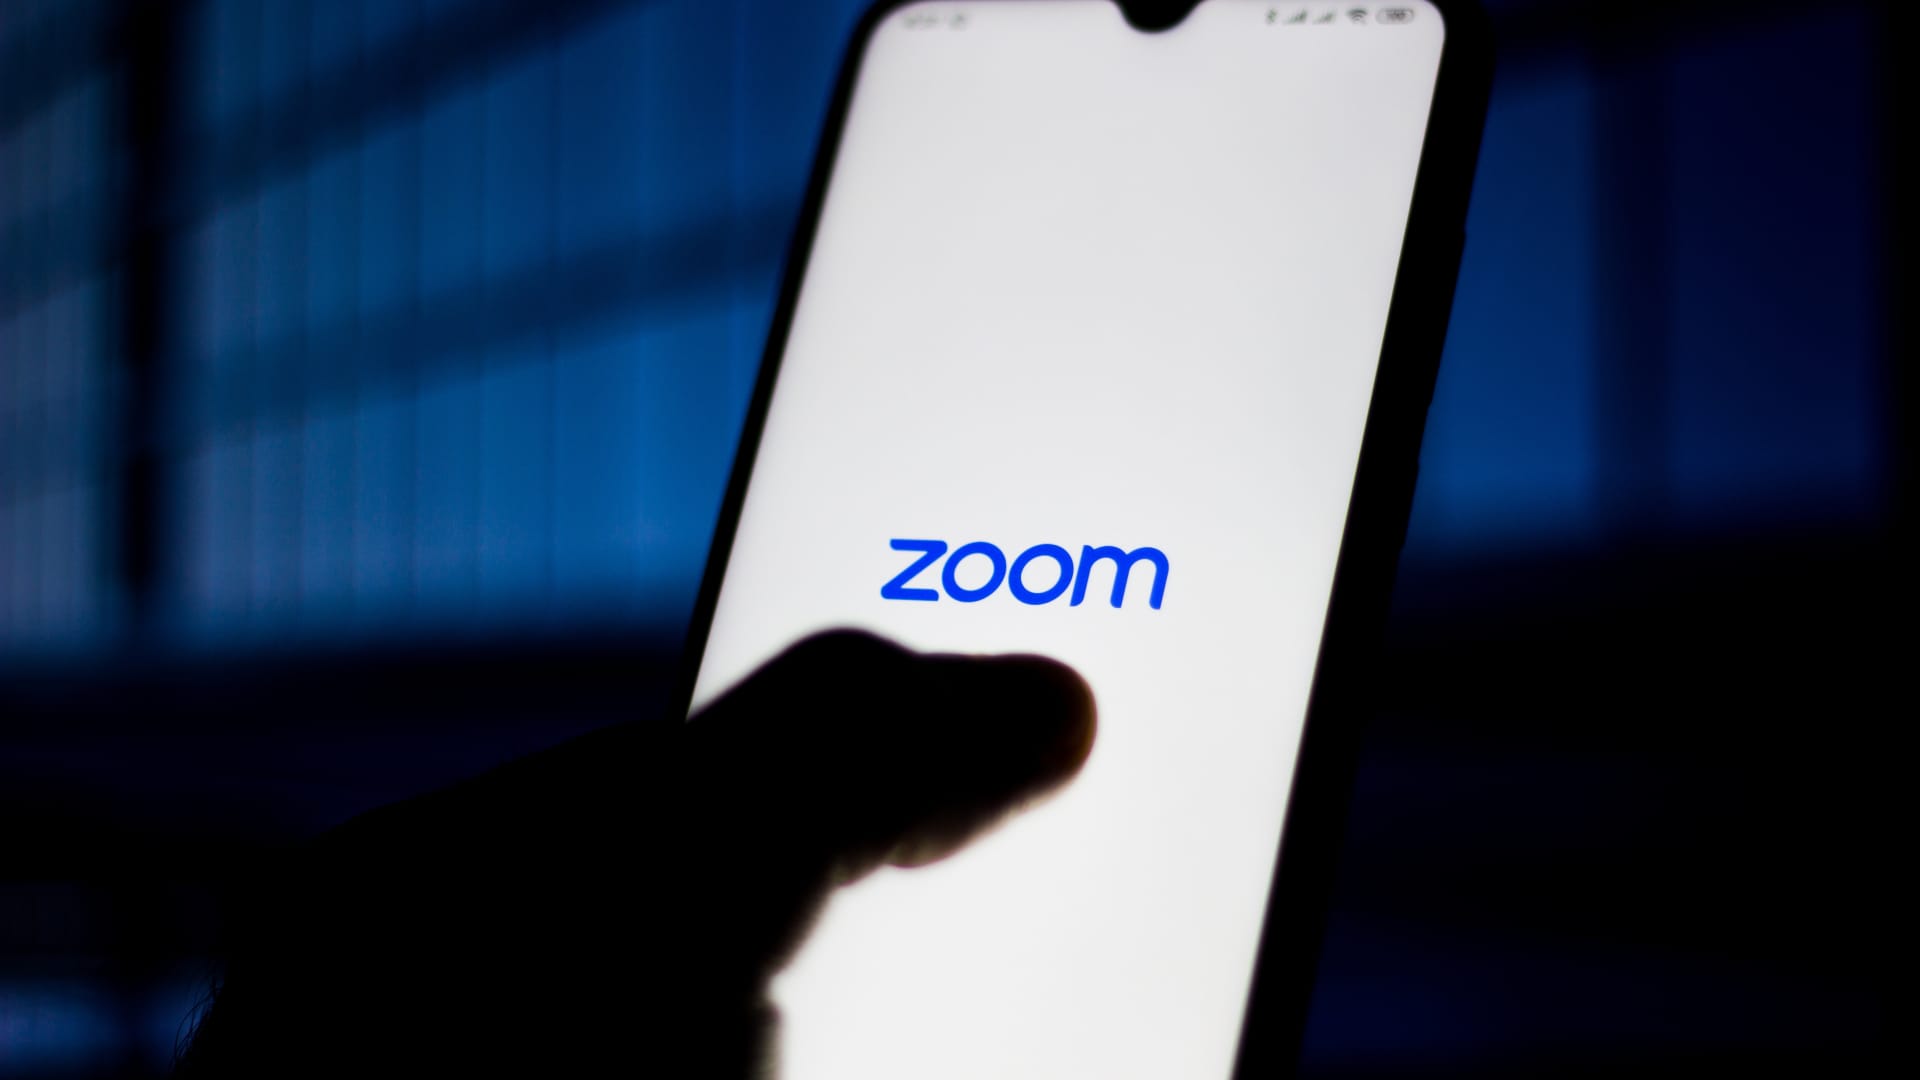 Zoom AI tools trained using some customer data, updated terms say